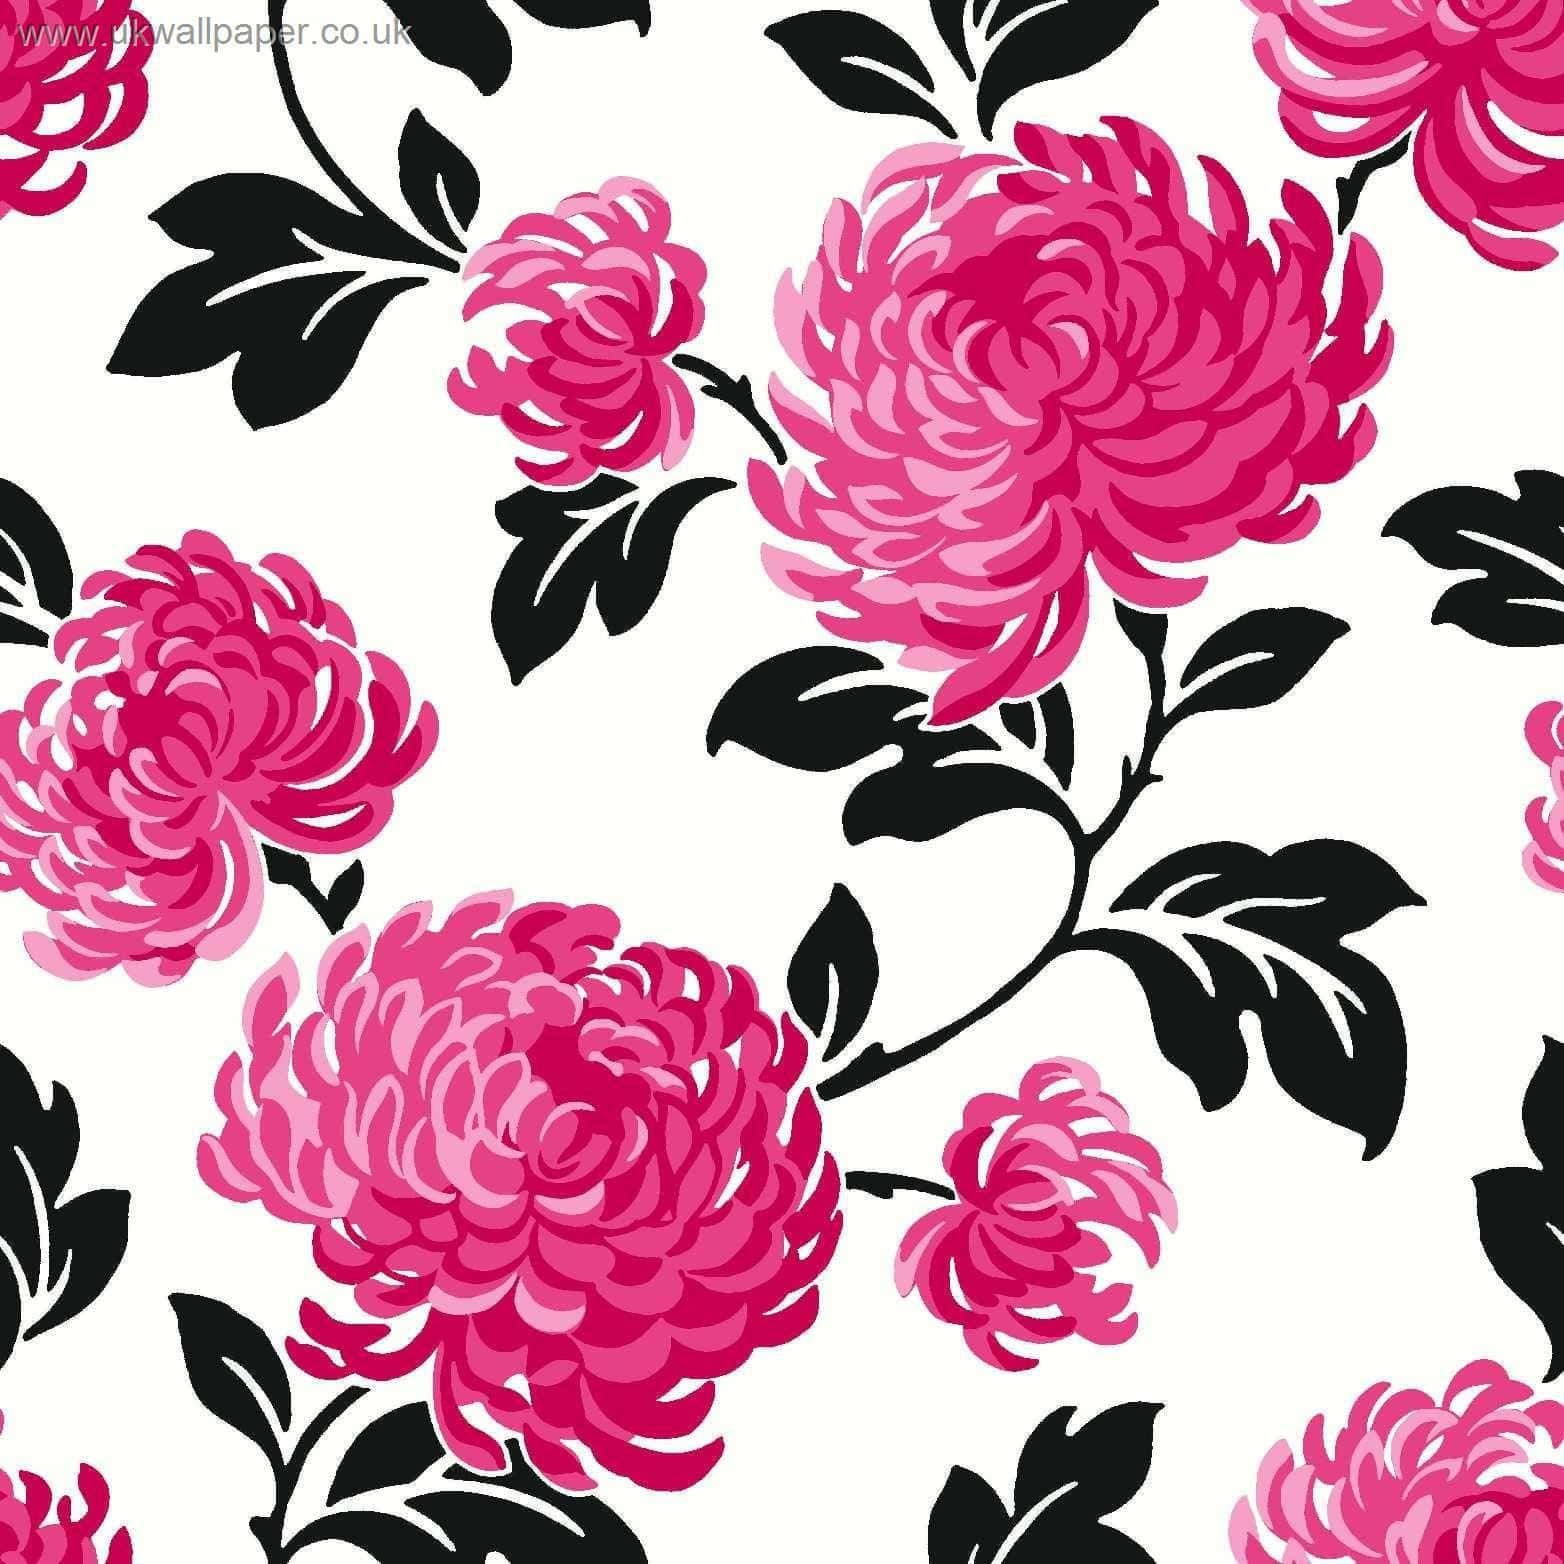 Spectacular pink and black color contrast. Wallpaper